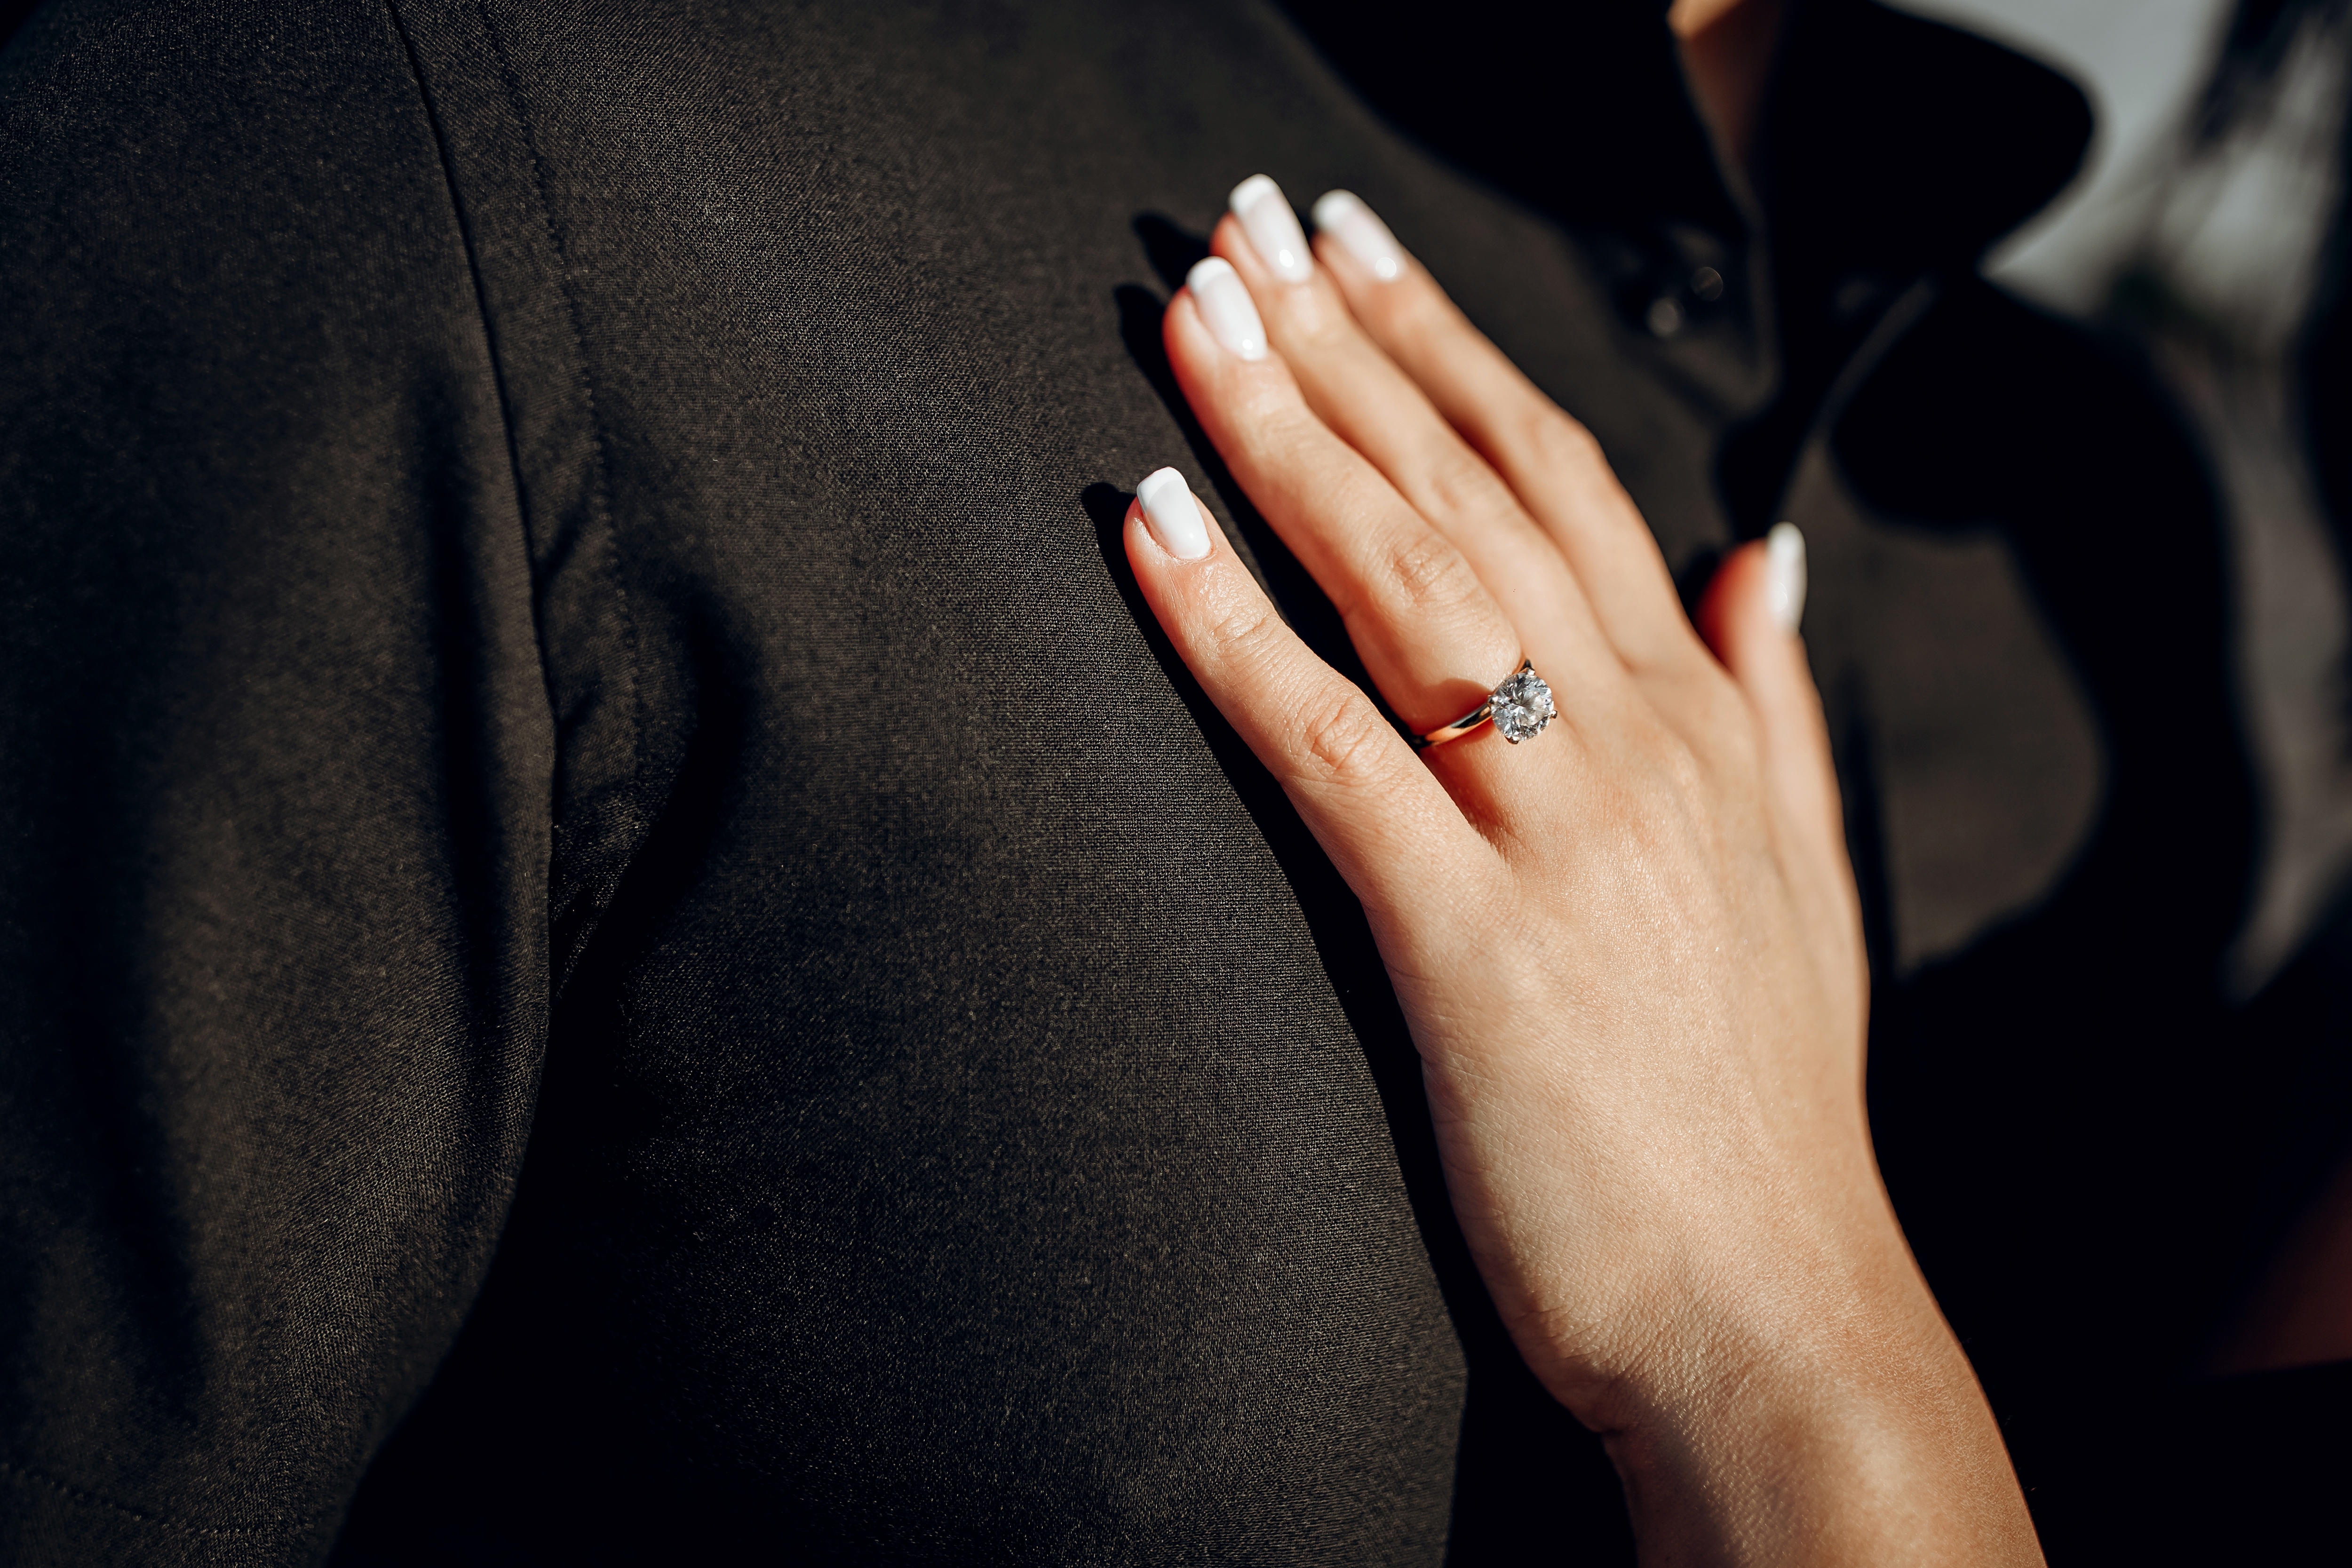 A woman's hand with a wedding ring| Source: Shutterstock